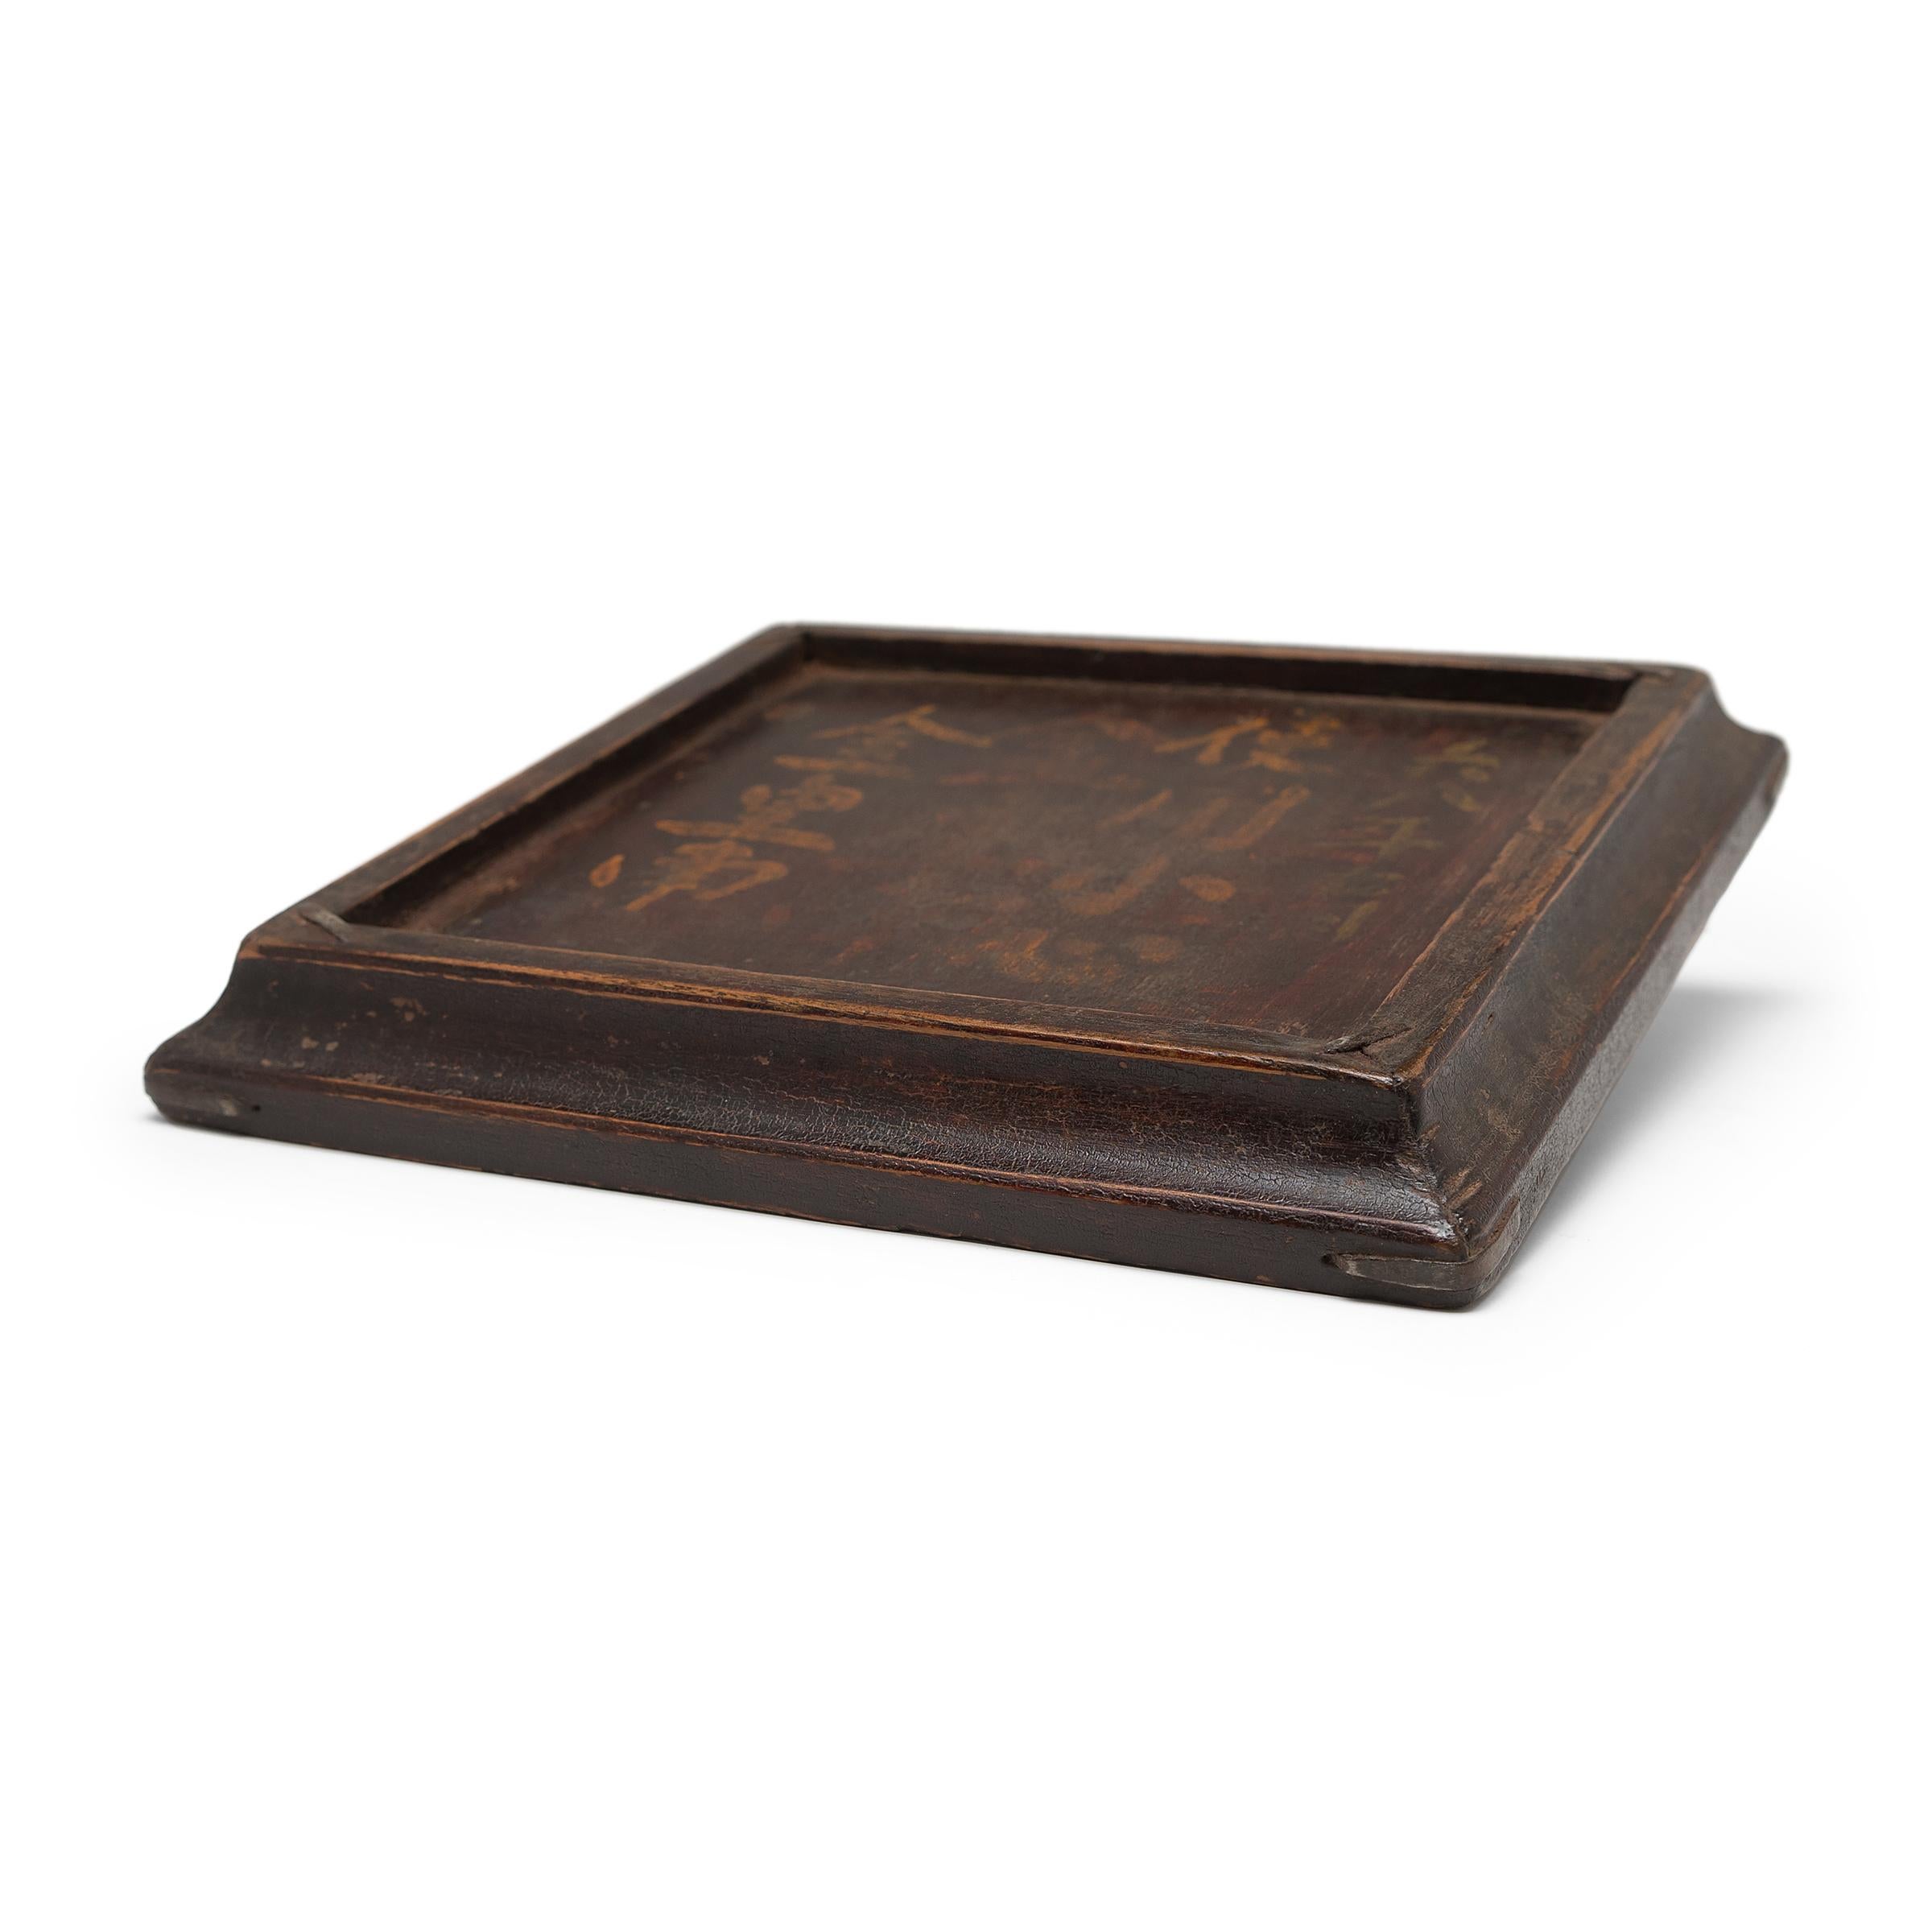 Simple lines, a modest form, and a layer of hand-brushed lacquer give this petite Qing-dynasty tray a provincial charm that recalls the warmth of home. A tray like this would have been used to serve tea or food to friends and family gathered on